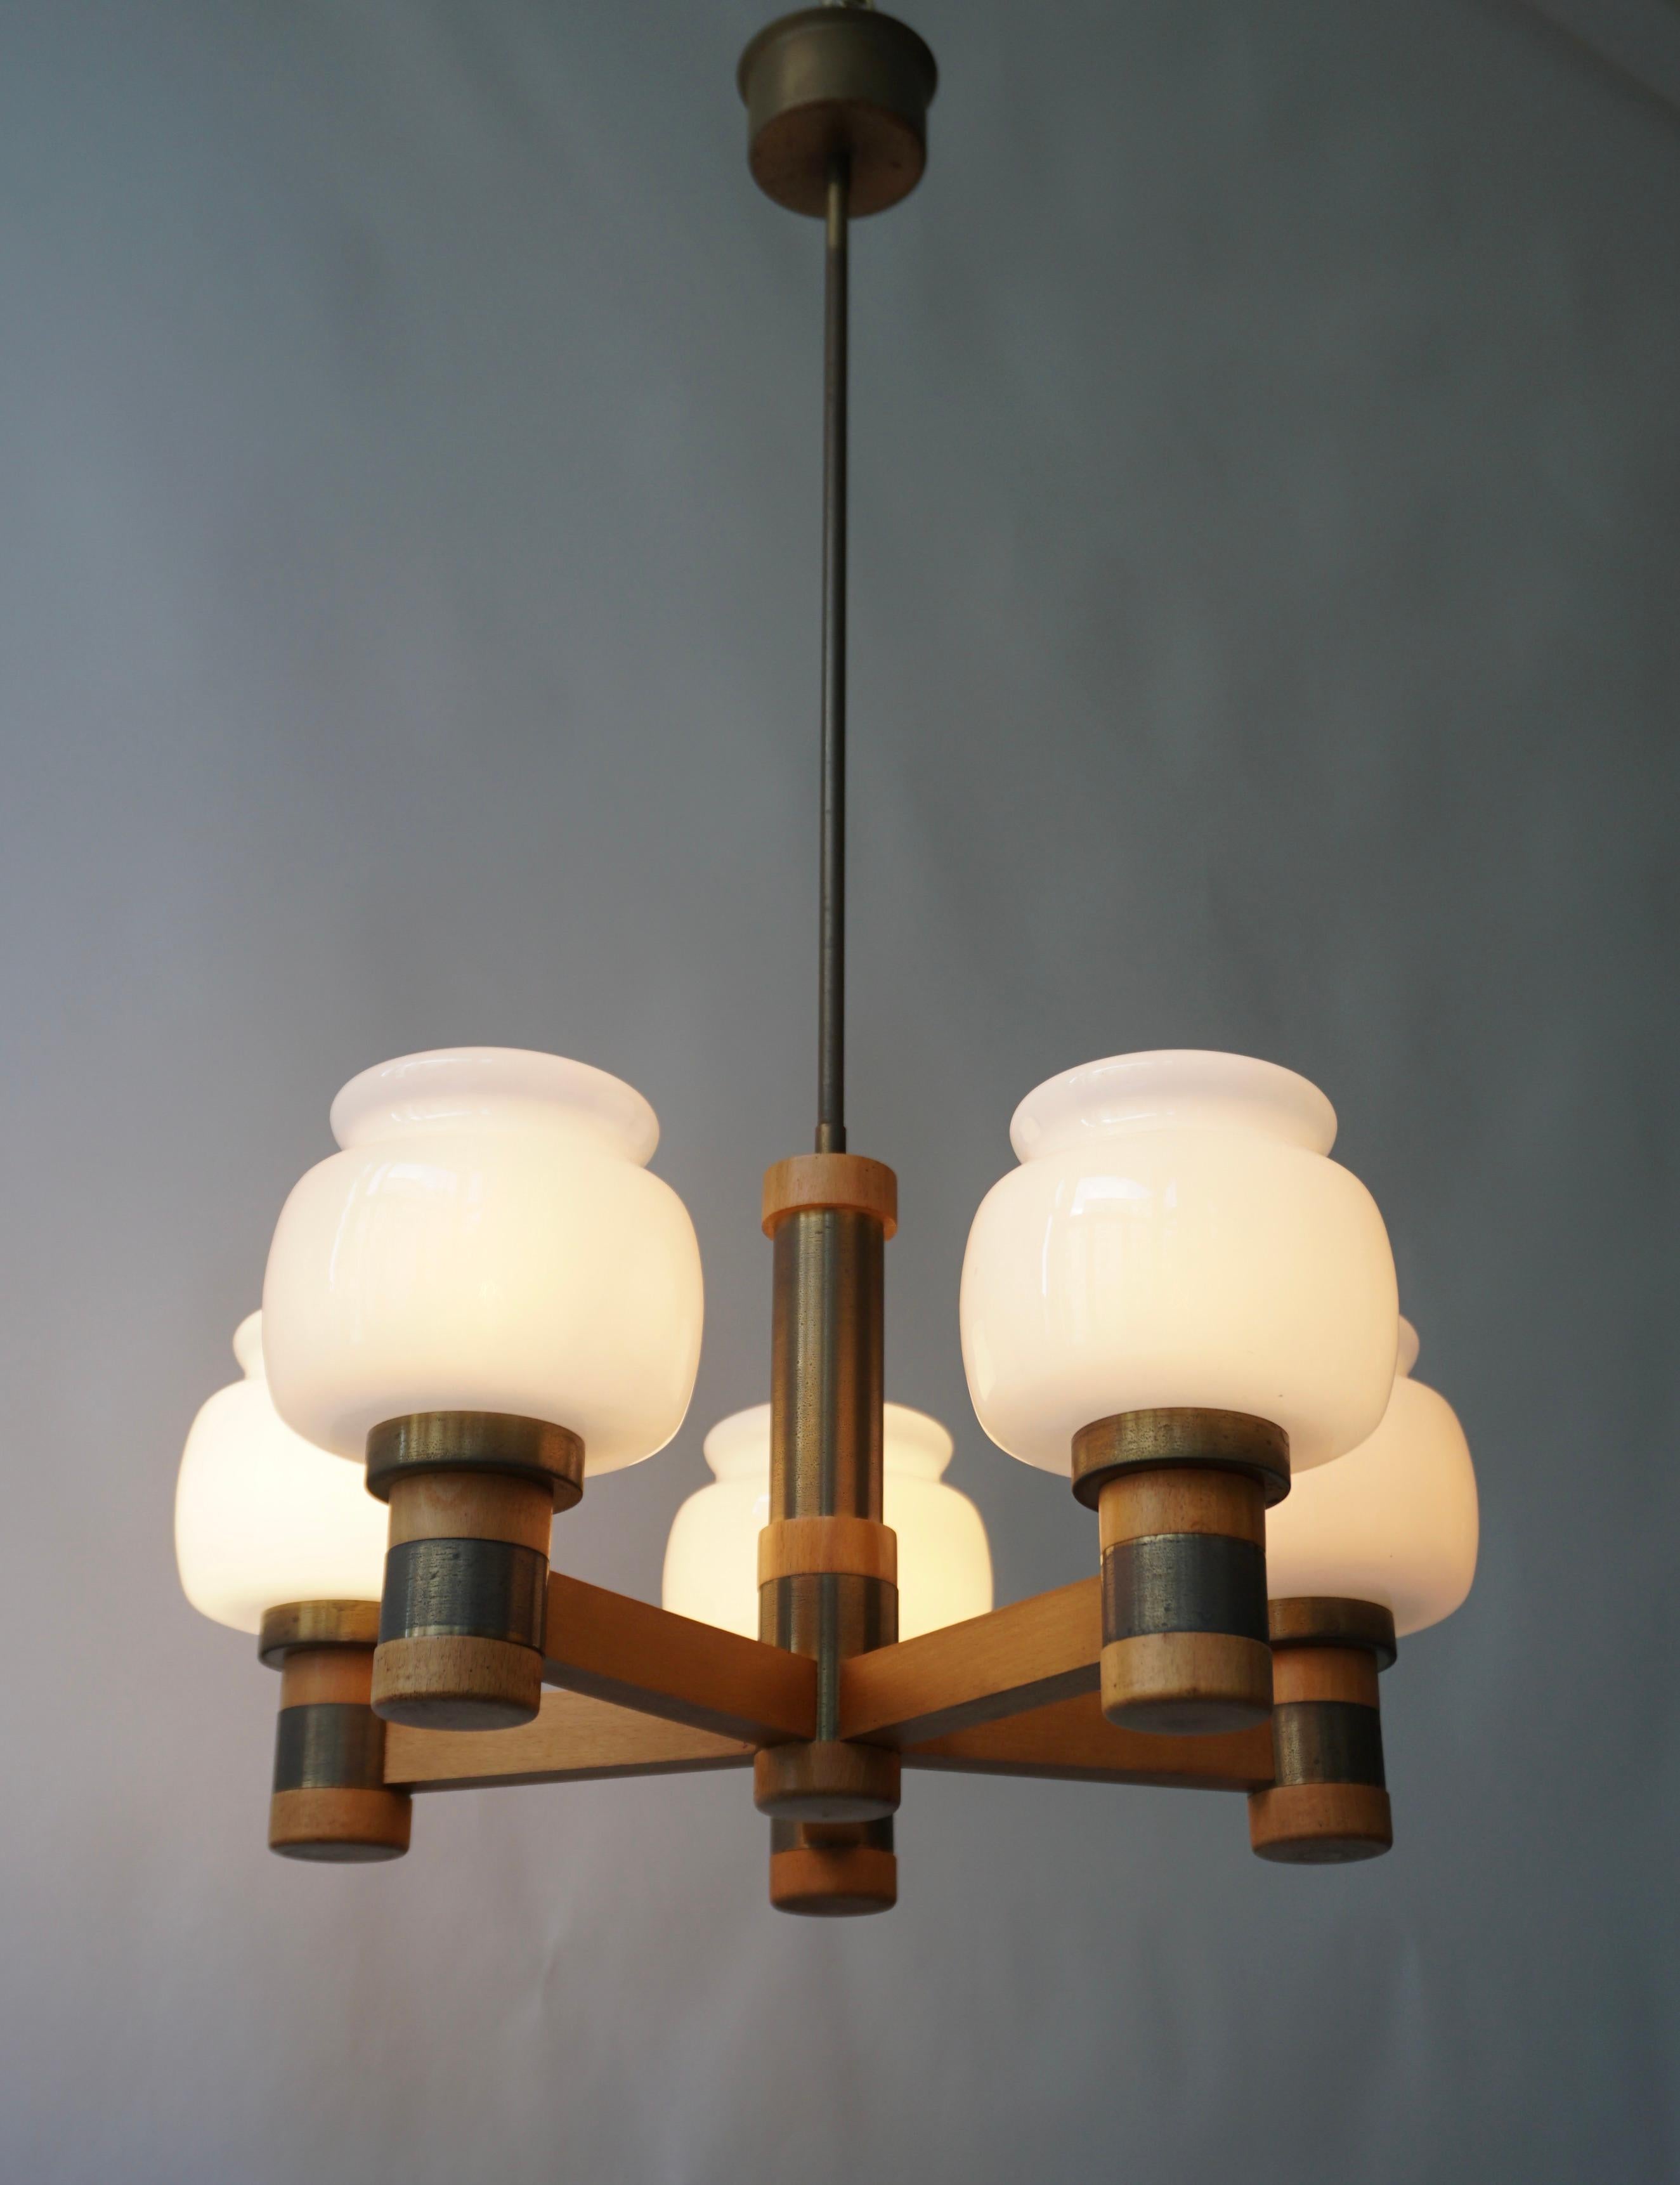 Scandinavian pendant light in wood and brass with 5 with opaline shades , 1960.

Diameter 50 cm.
Height 80 cm.
Height fixture 24 cm.
The light requires five single E14 screw fit lightbulbs (45 Watt max.) LED compatible.
